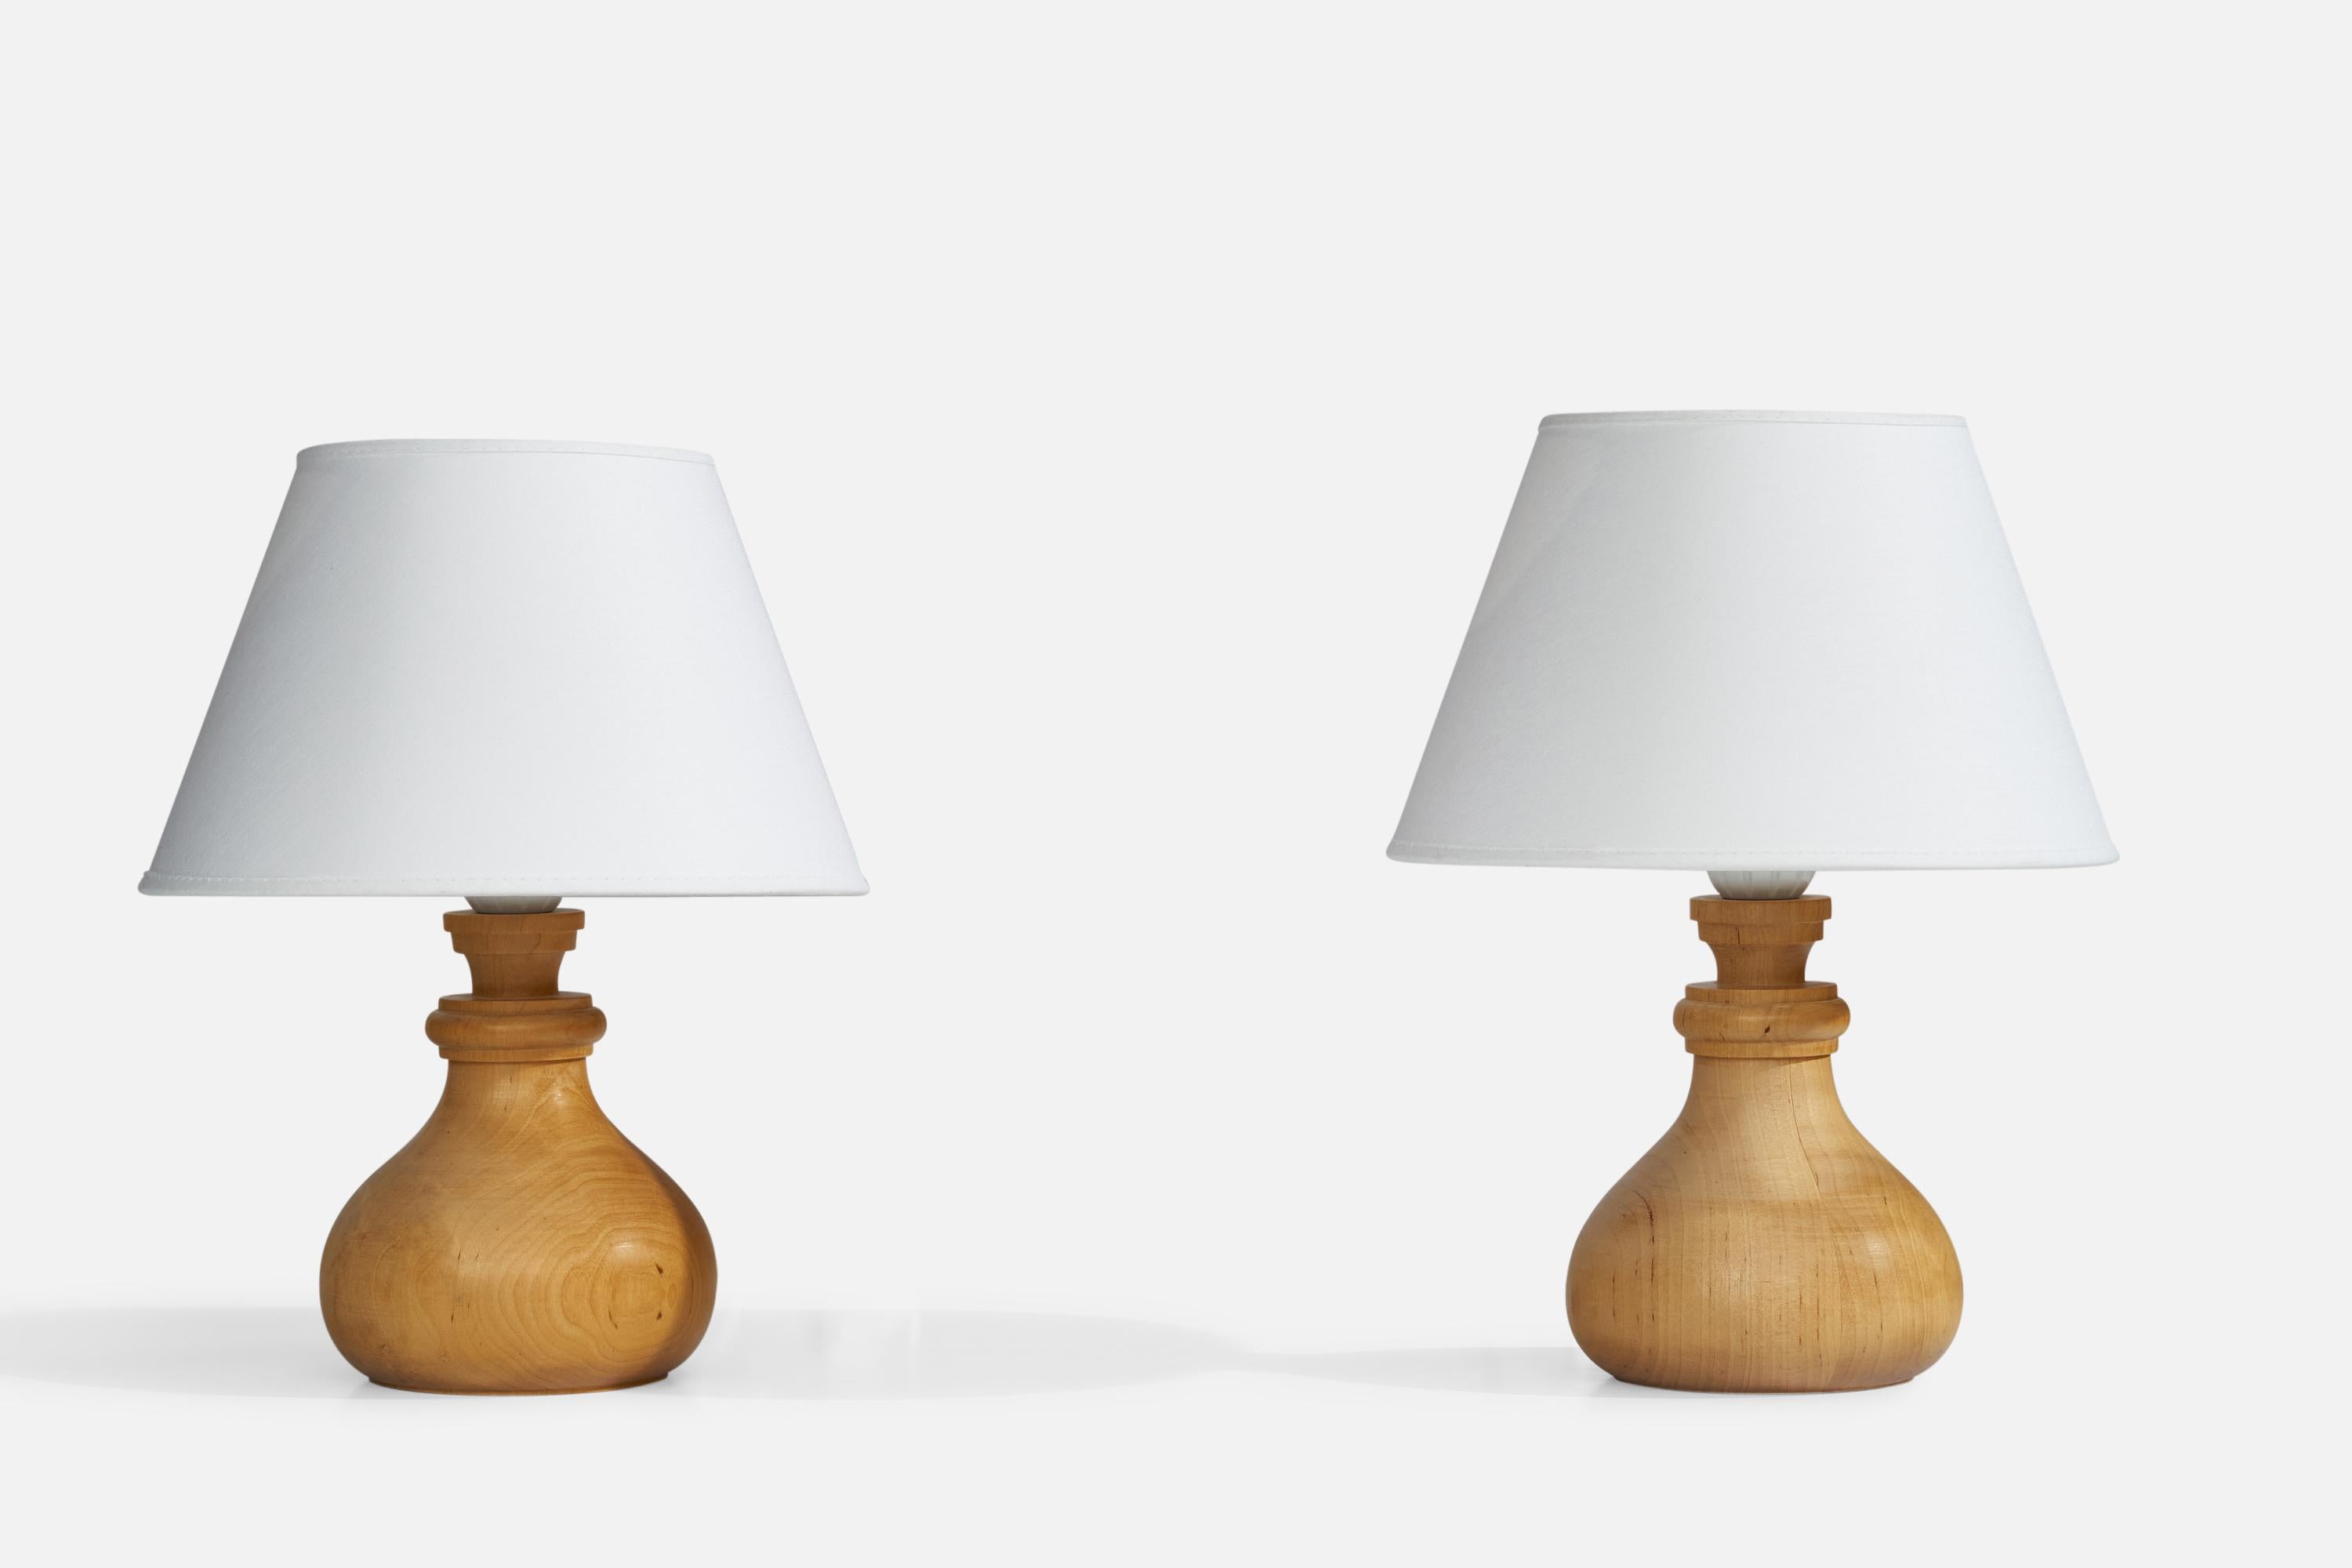 A pair of pine table lamps designed and produced in Sweden, dated 1978.

Dimensions of Lamp (inches): 7.75”  H x 4.5” Diameter
Dimensions of Shade (inches): 4.75”  Top Diameter x 8.25” Bottom Diameter x 5.25” H
Dimensions of Lamp with Shade